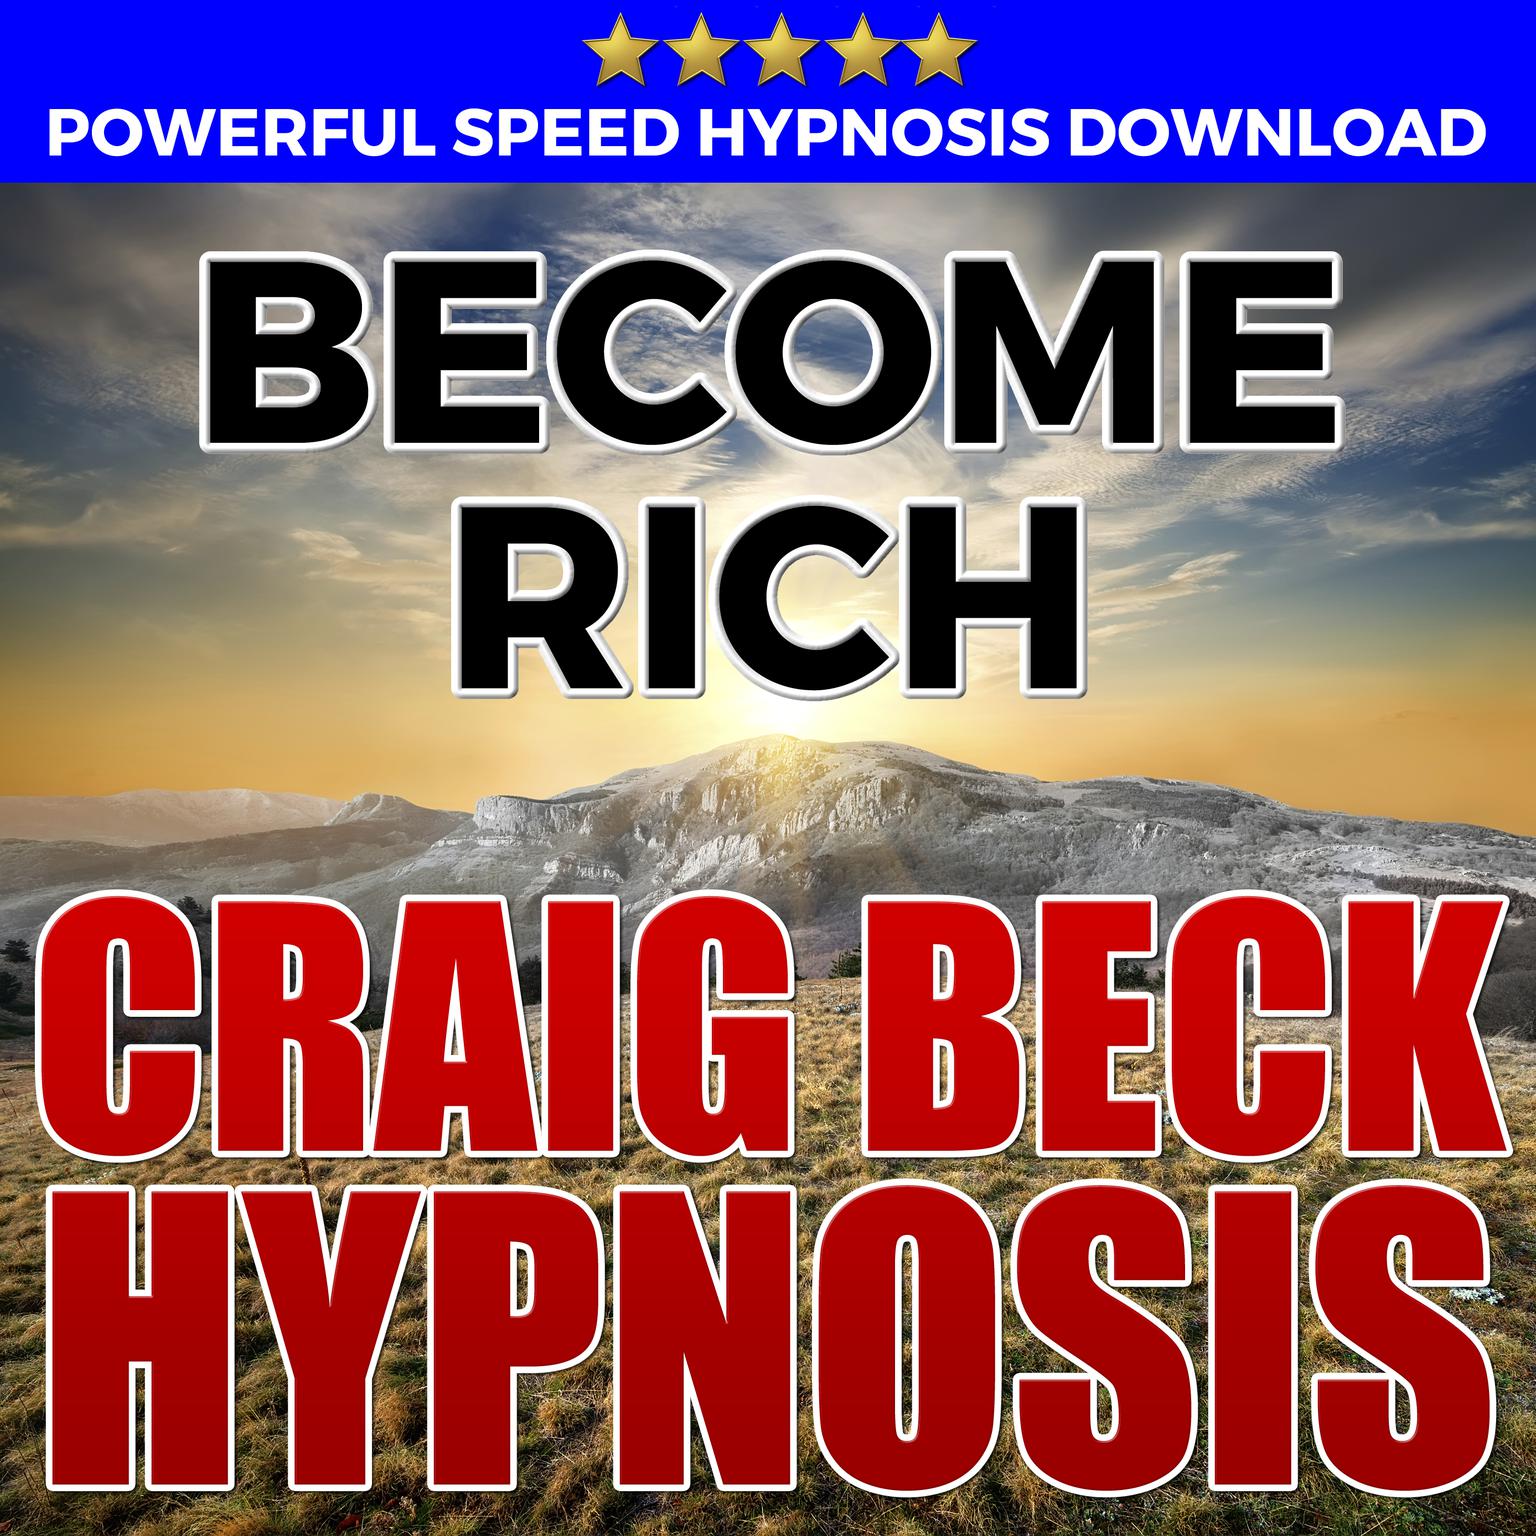 Become Rich: Hypnosis Downloads Audiobook, by Craig Beck